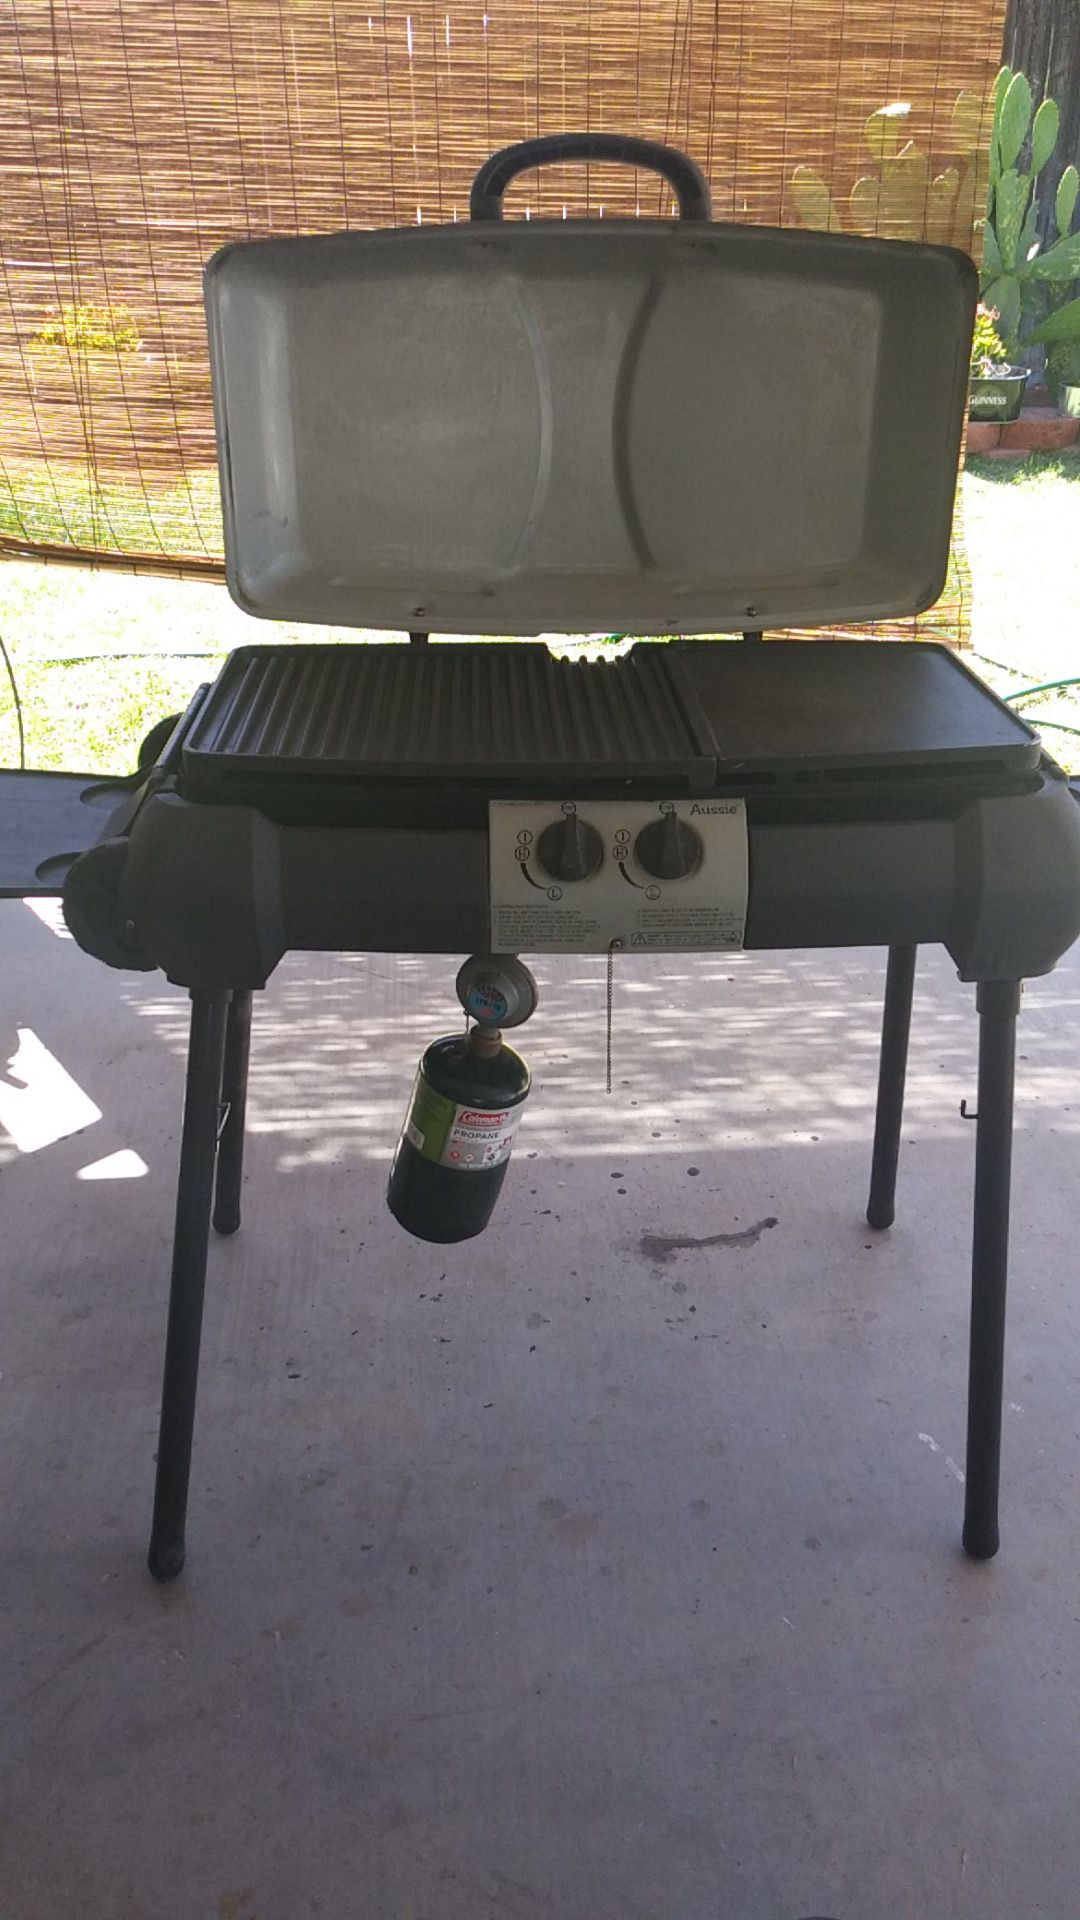 Selling my BBQ propane good condition portables